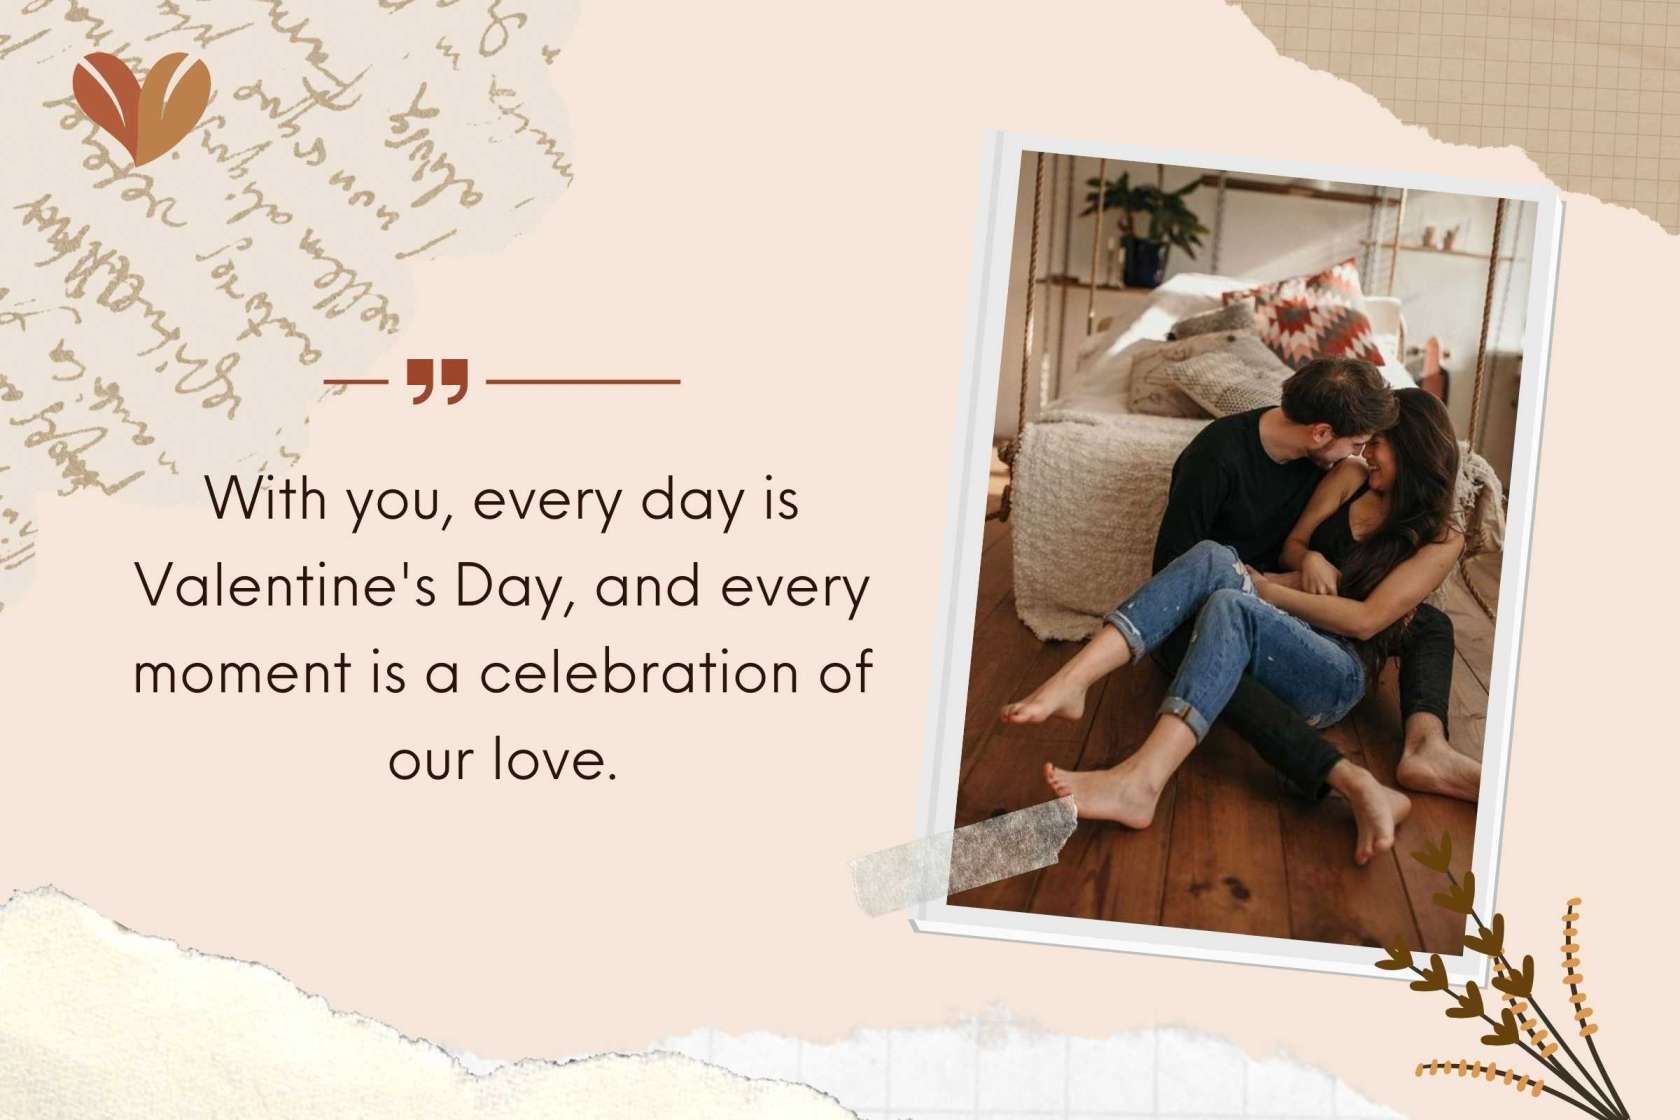 With you, every day is Valentine's Day, and every moment is a celebration of our love.